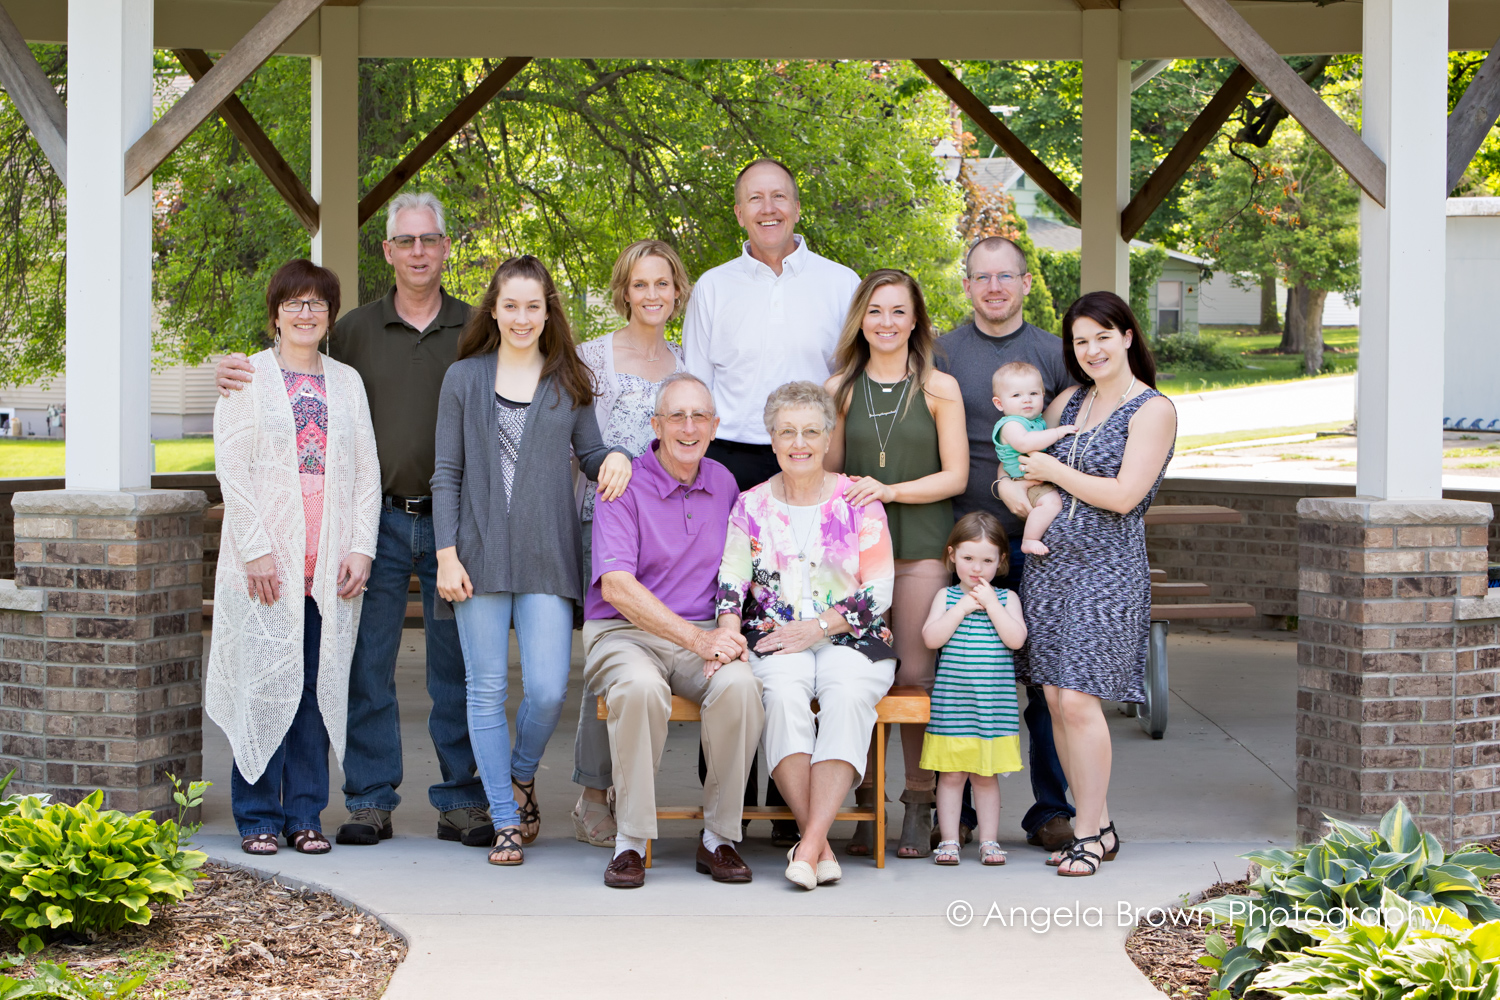 Angela Brown Photography Extended Family Portrait Photographer